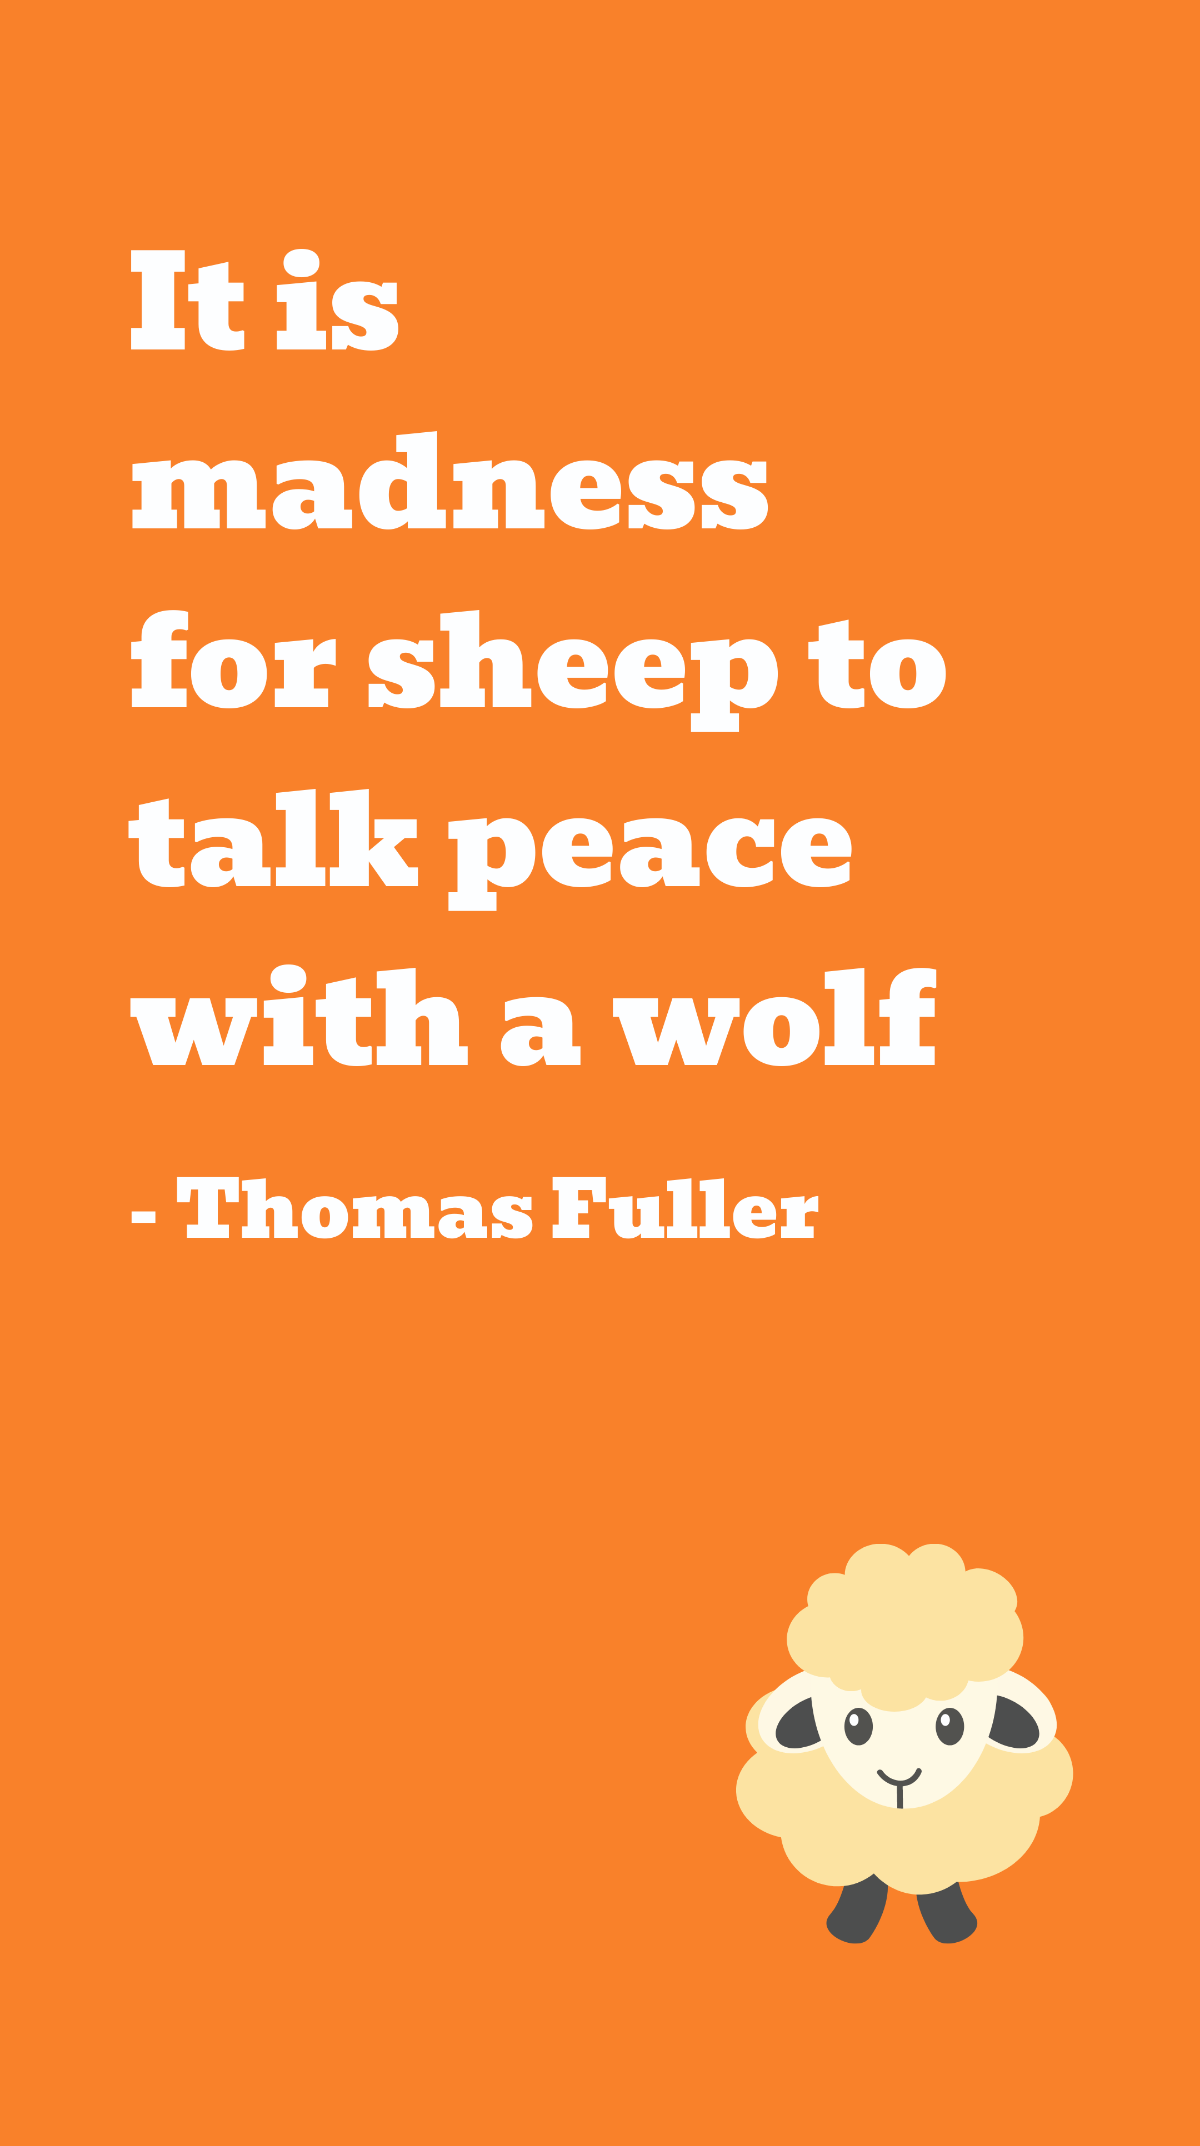 Free Thomas Fuller - It is madness for sheep to talk peace with a wolf Template